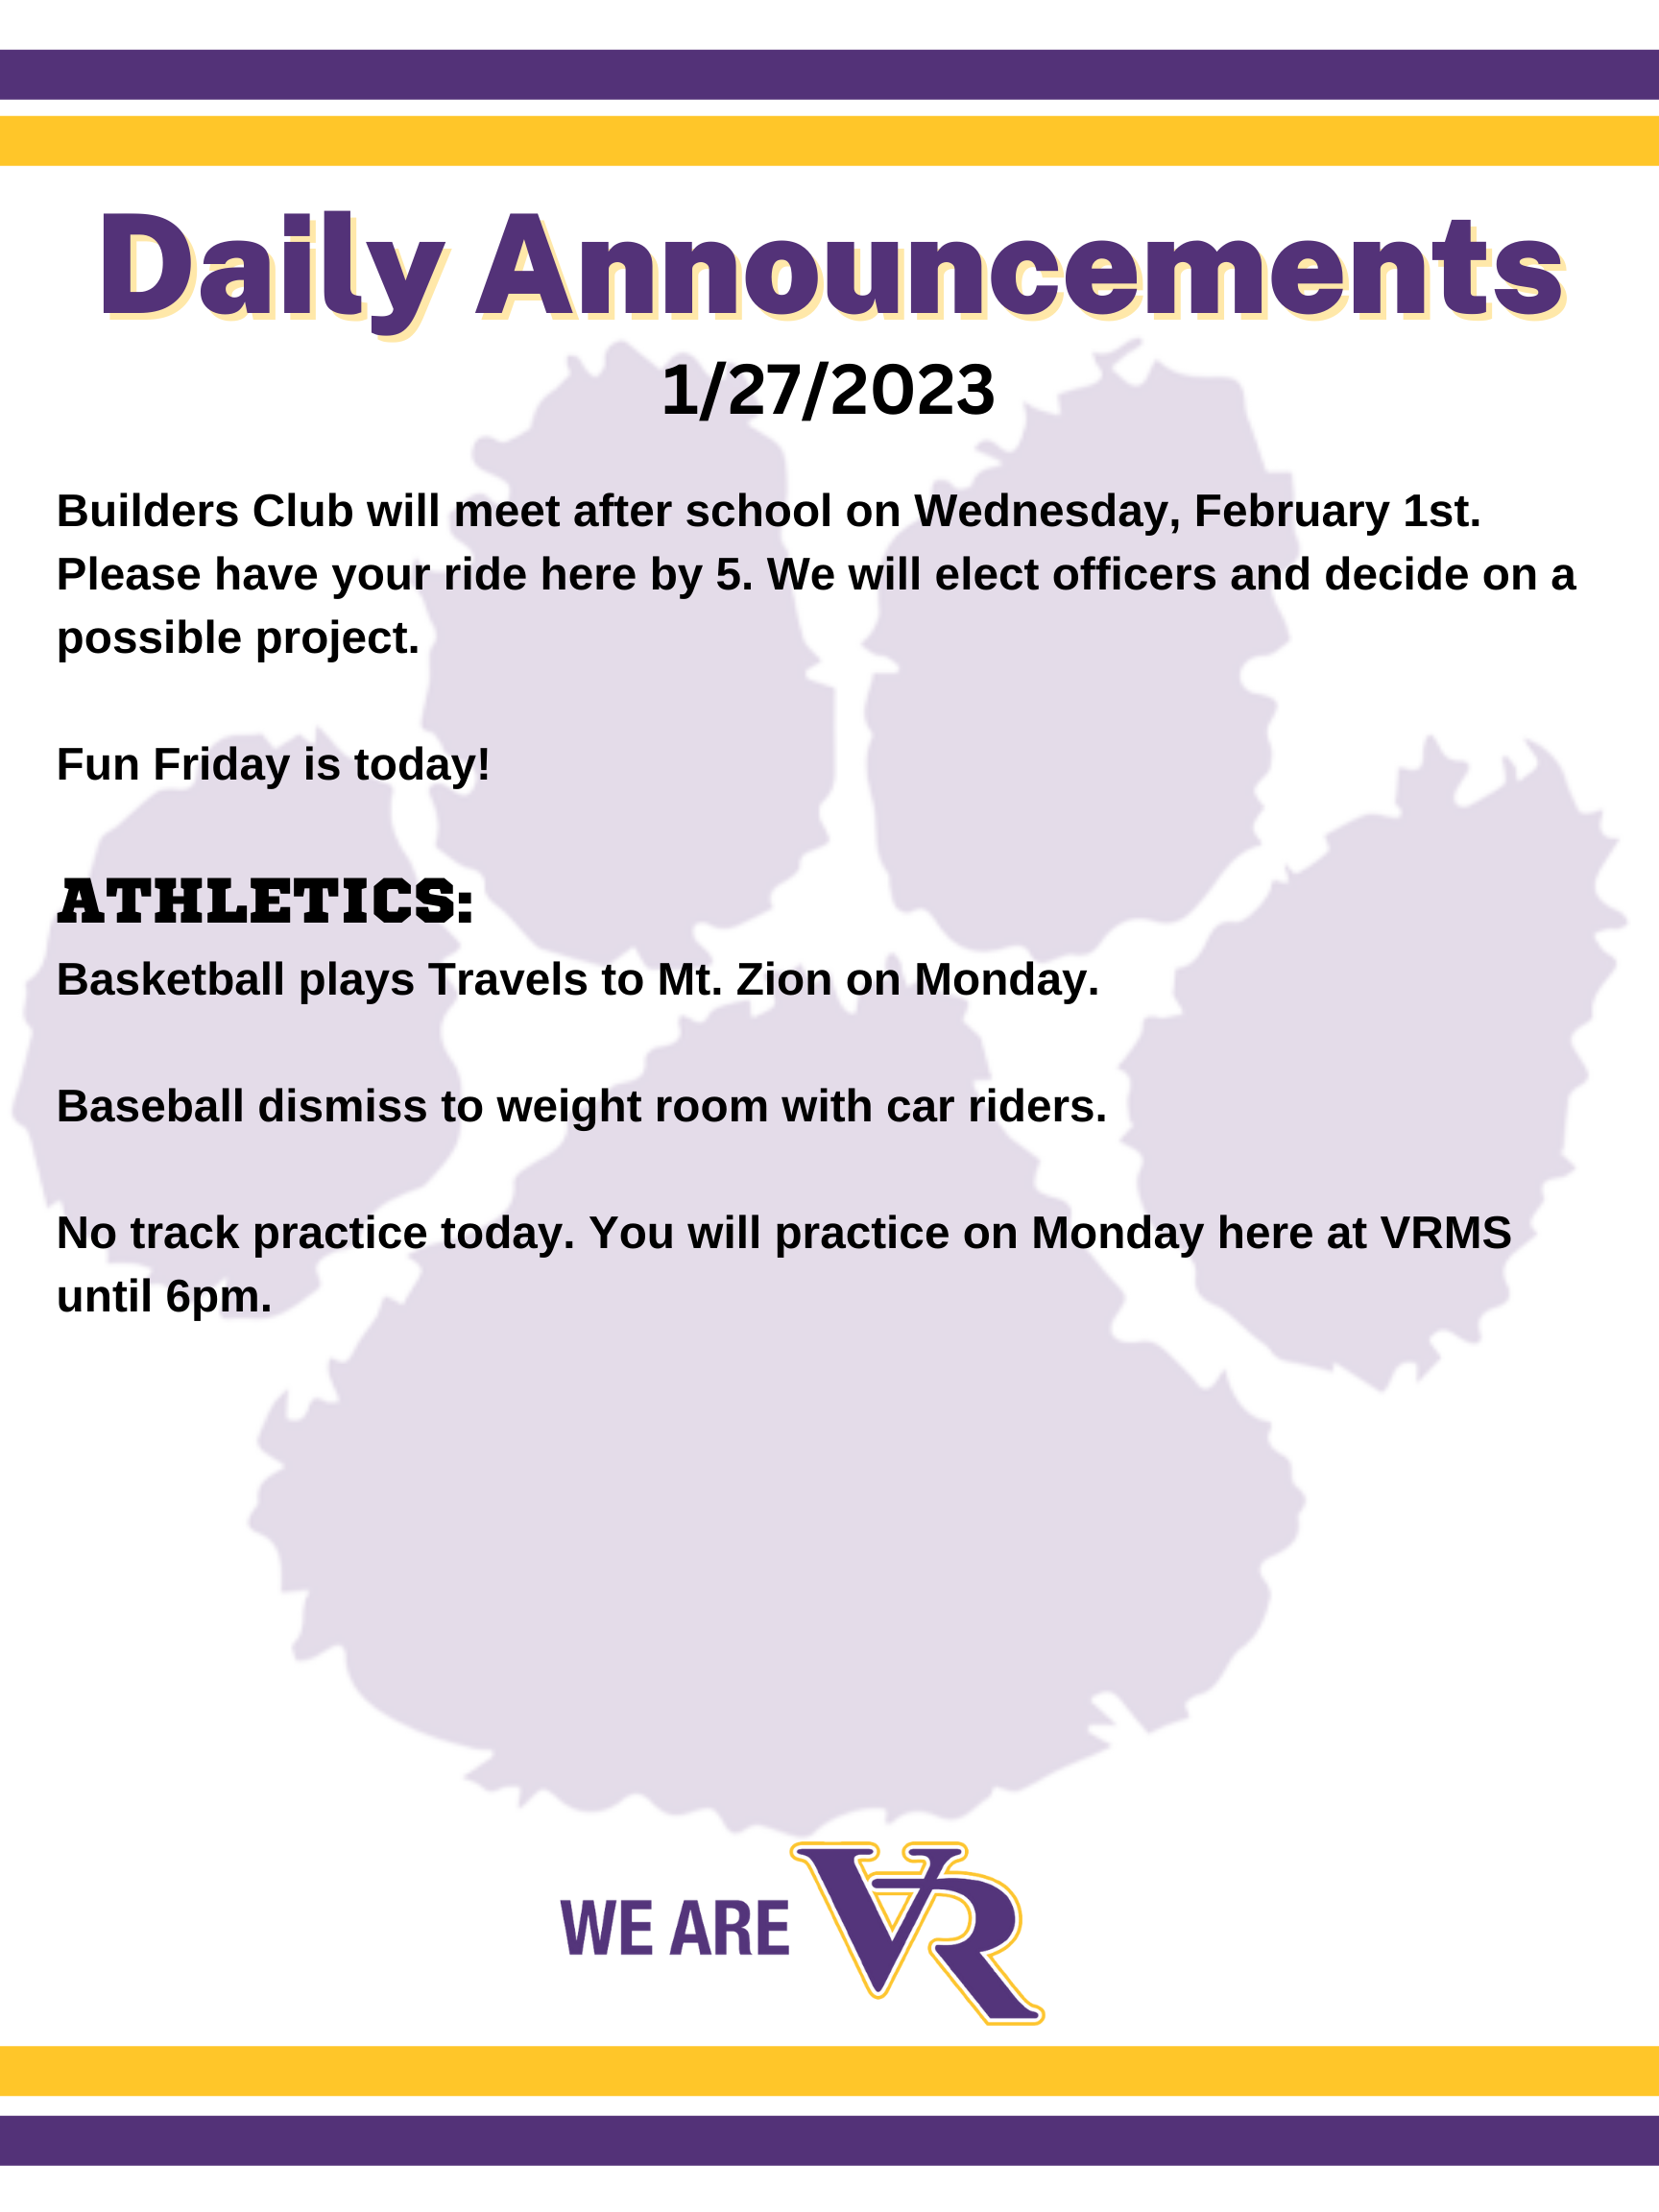 Daily Announcements:  Builders Club will meet after school on Wednesday, February 1st. Please have your ride here by 5. We will elect officers and decide on a possible project.  Fun Friday is today!   ATHLETICS: Basketball plays Travels to Mt. Zion on Monday.  Baseball dismiss to weight room with car riders.  No track practice today. You will practice on Monday here at VRMS until 6pm. 